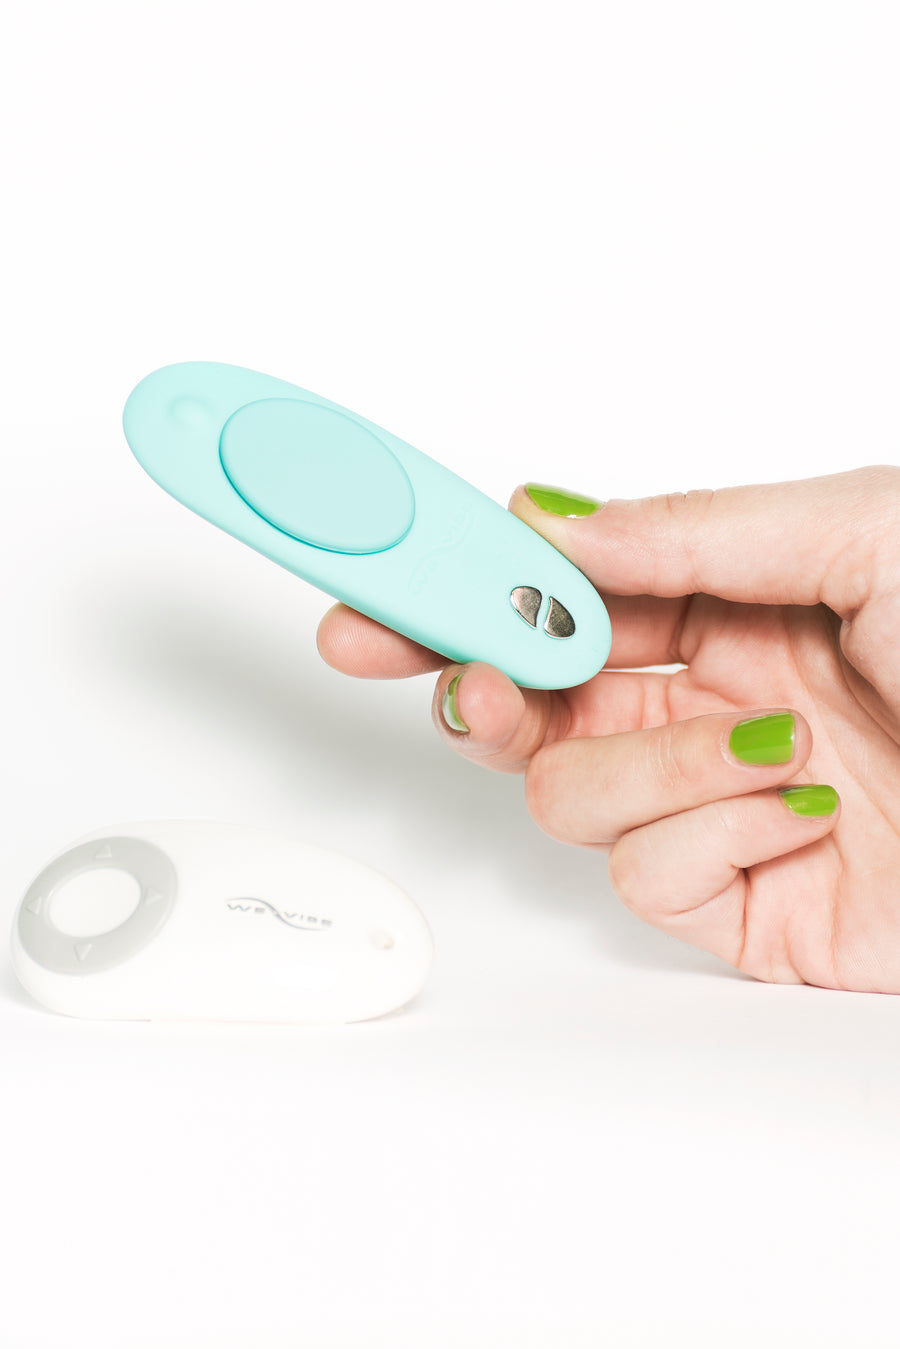 MOXIE BY WE-VIBE wearable clitoral vibrator